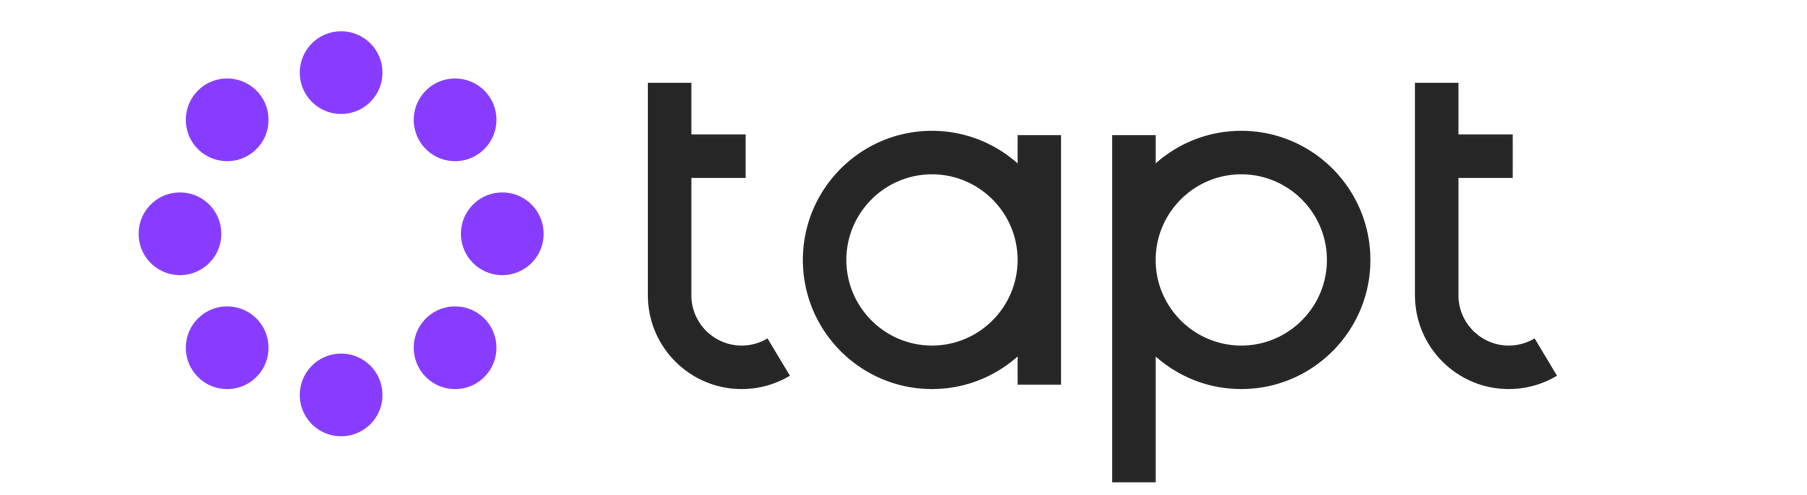 A logo for tapt with purple dots on a white background.